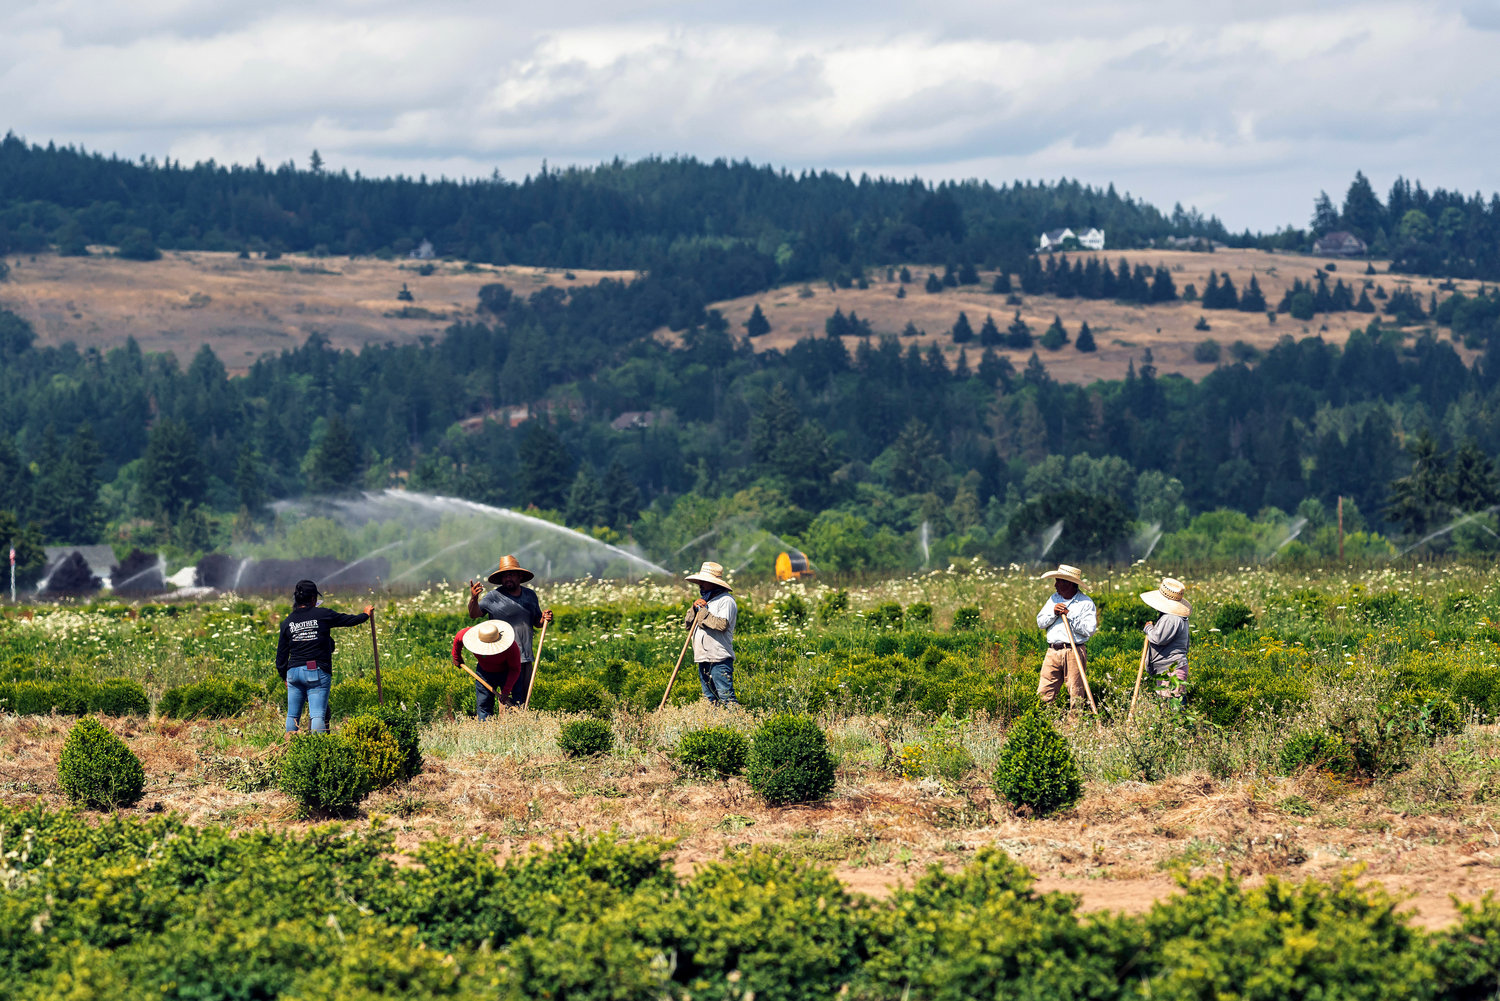 Farmworkers in Oregon took a break from tilling soil during a summer 2021 heat wave. The U.S Department of Homeland Security recently announced a policy that will grant undocumented migrant workers greater protection against deportation when they report labor right violations.